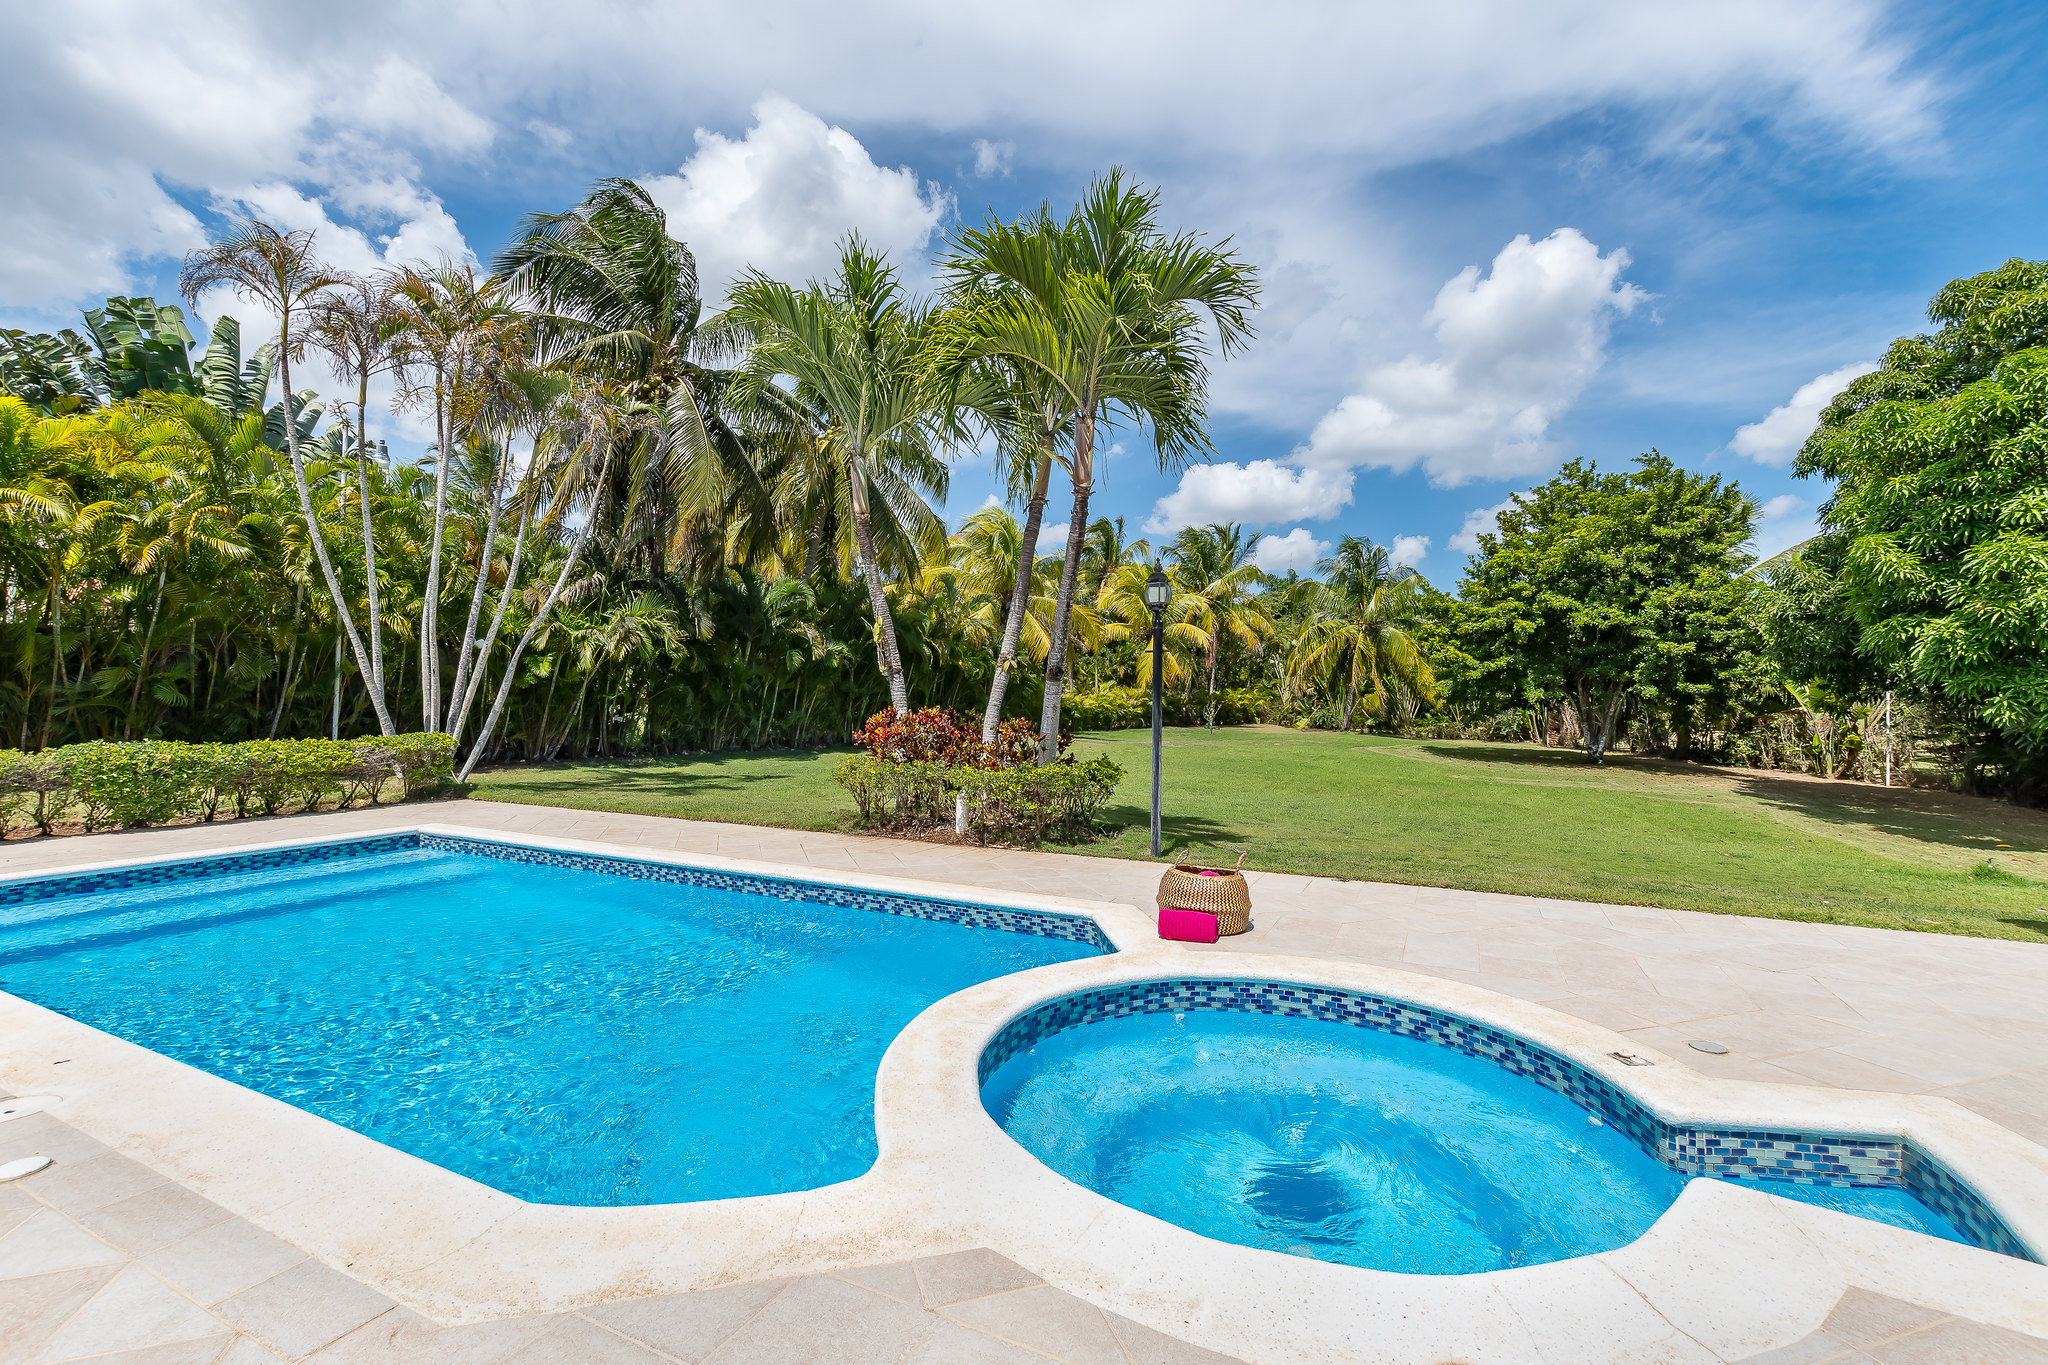 Casa de Campo villa for rent in Caribbean style - pool, jacuzzi, volleyball net 4